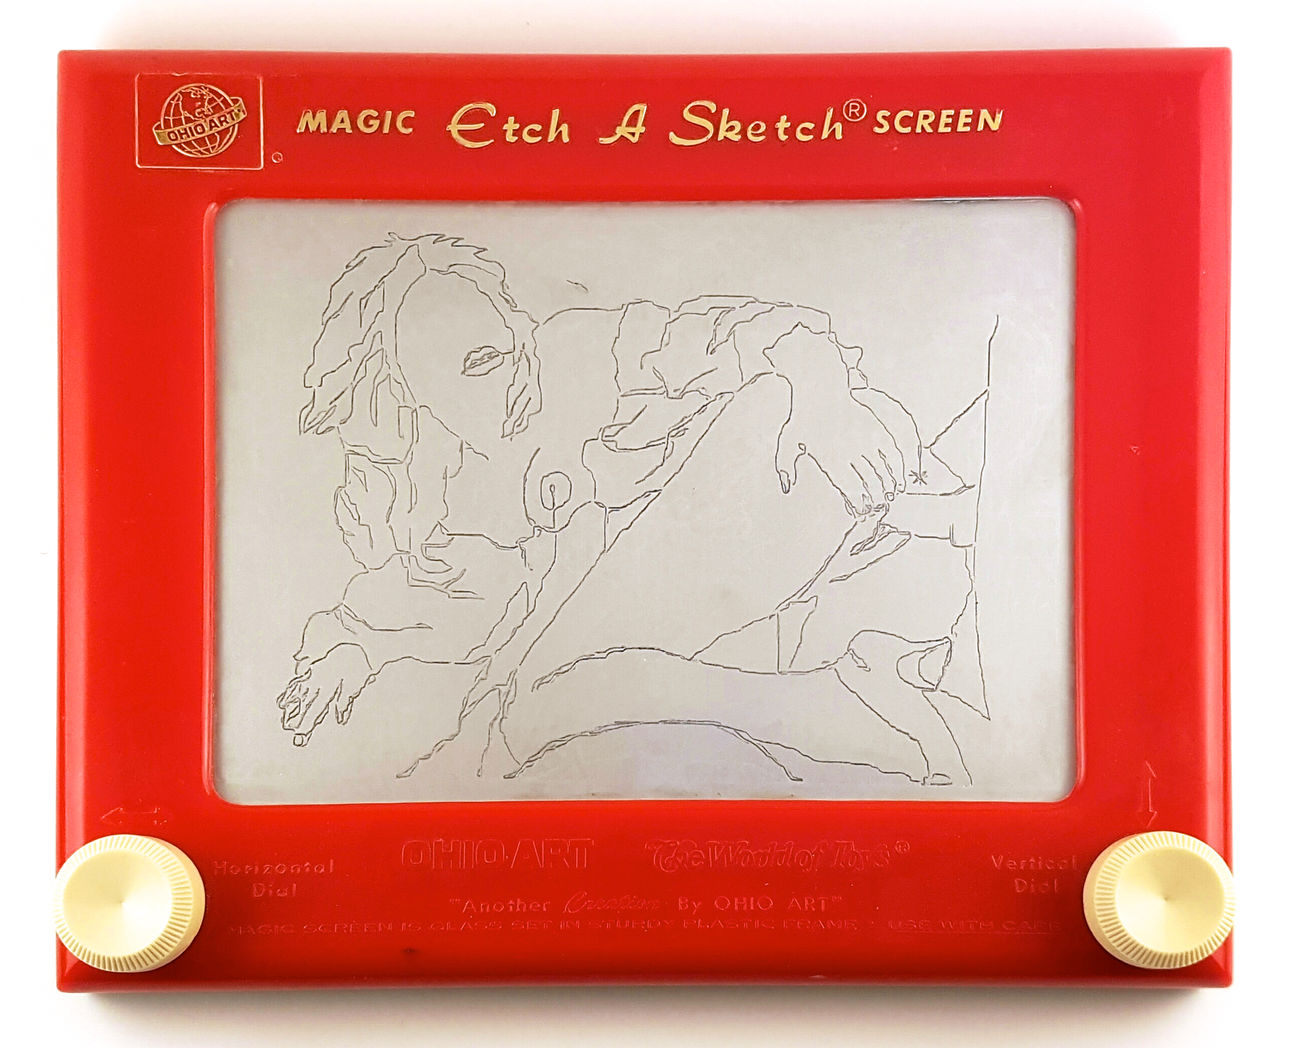 Highly suggestive drawings on an Etch A Sketch